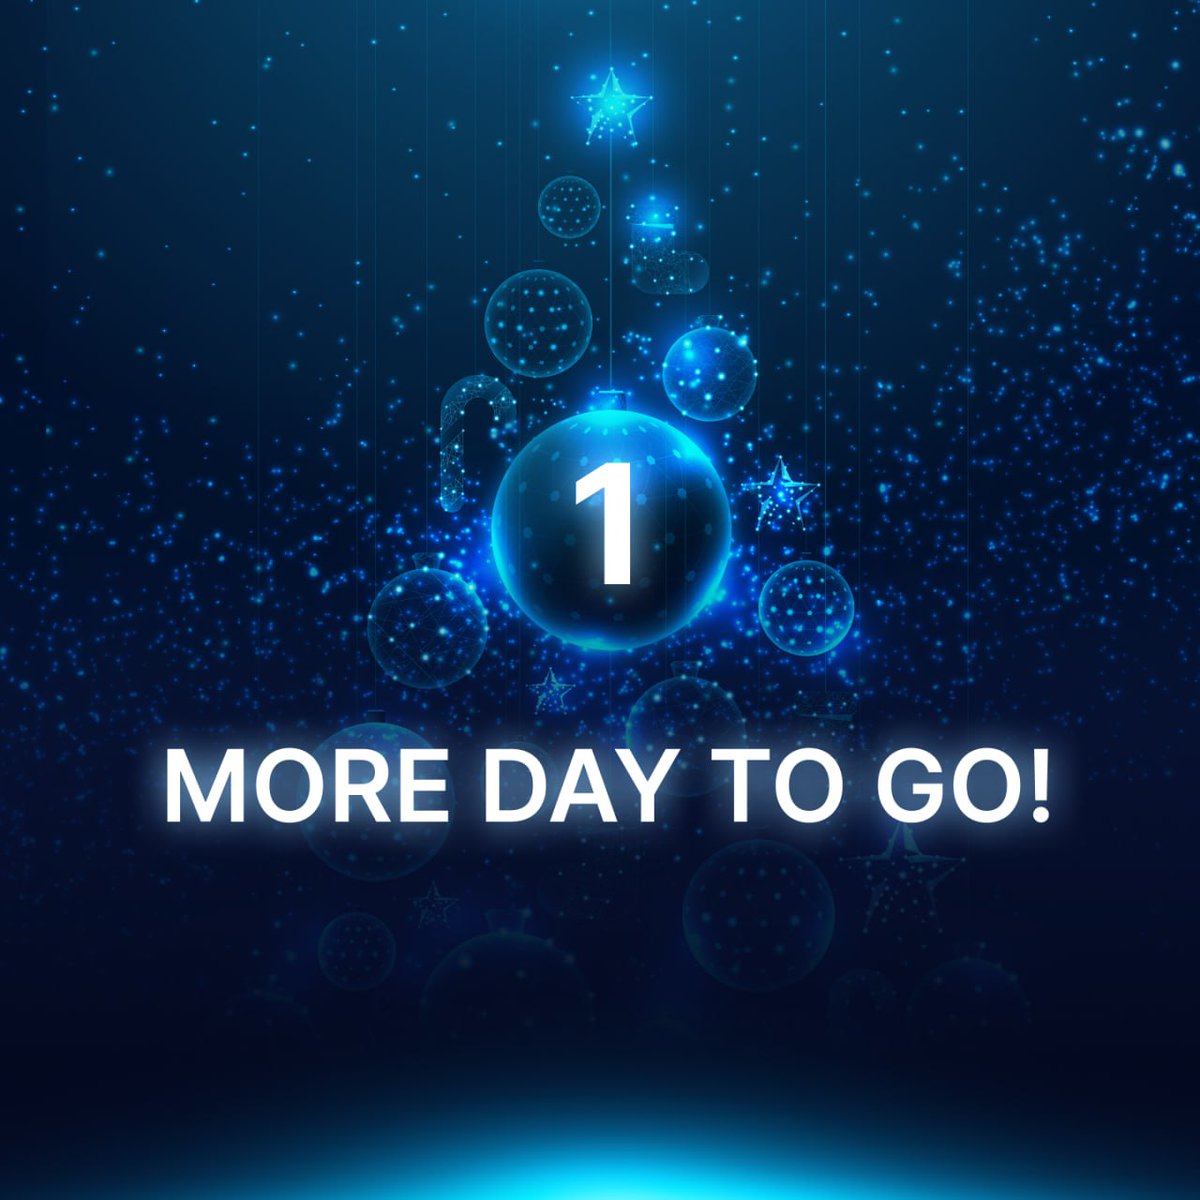 🎉 Salad's Festive Forecast Fiesta'! 🎄 Prepare for a thrilling holiday guessing game where your predictions can unlock fantastic rewards! REWARD POOL: Up to 1,000,000 $SALD tokens! Stay tuned for more information on the launch tomorrow! 🌟